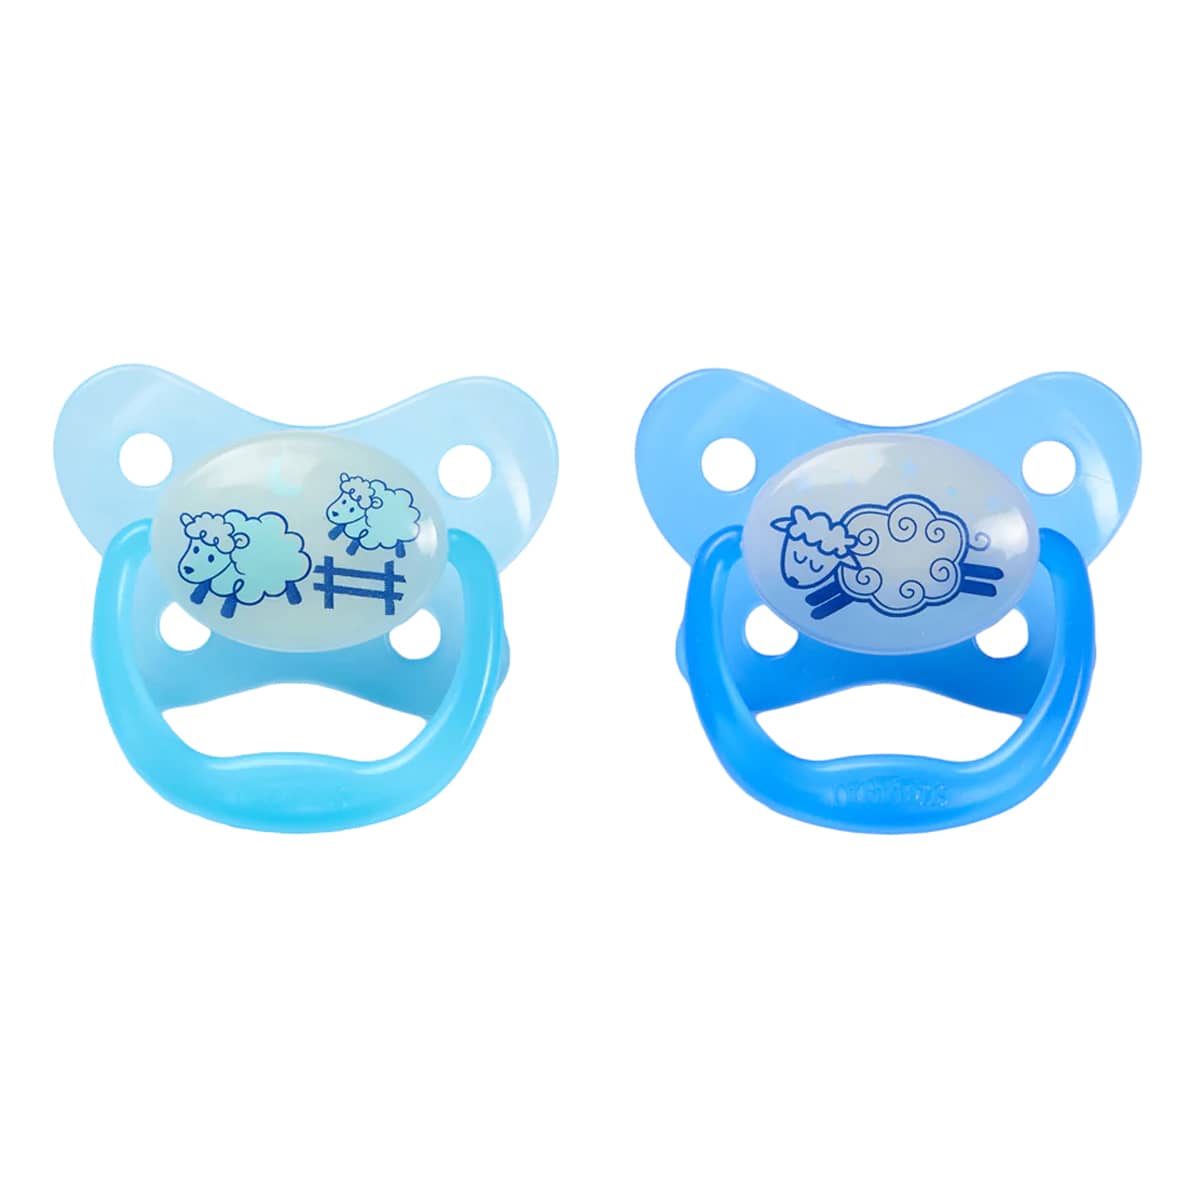 Dr Browns Prevent Contoured Glow in the Dark Pacifiers Blue 0-6m